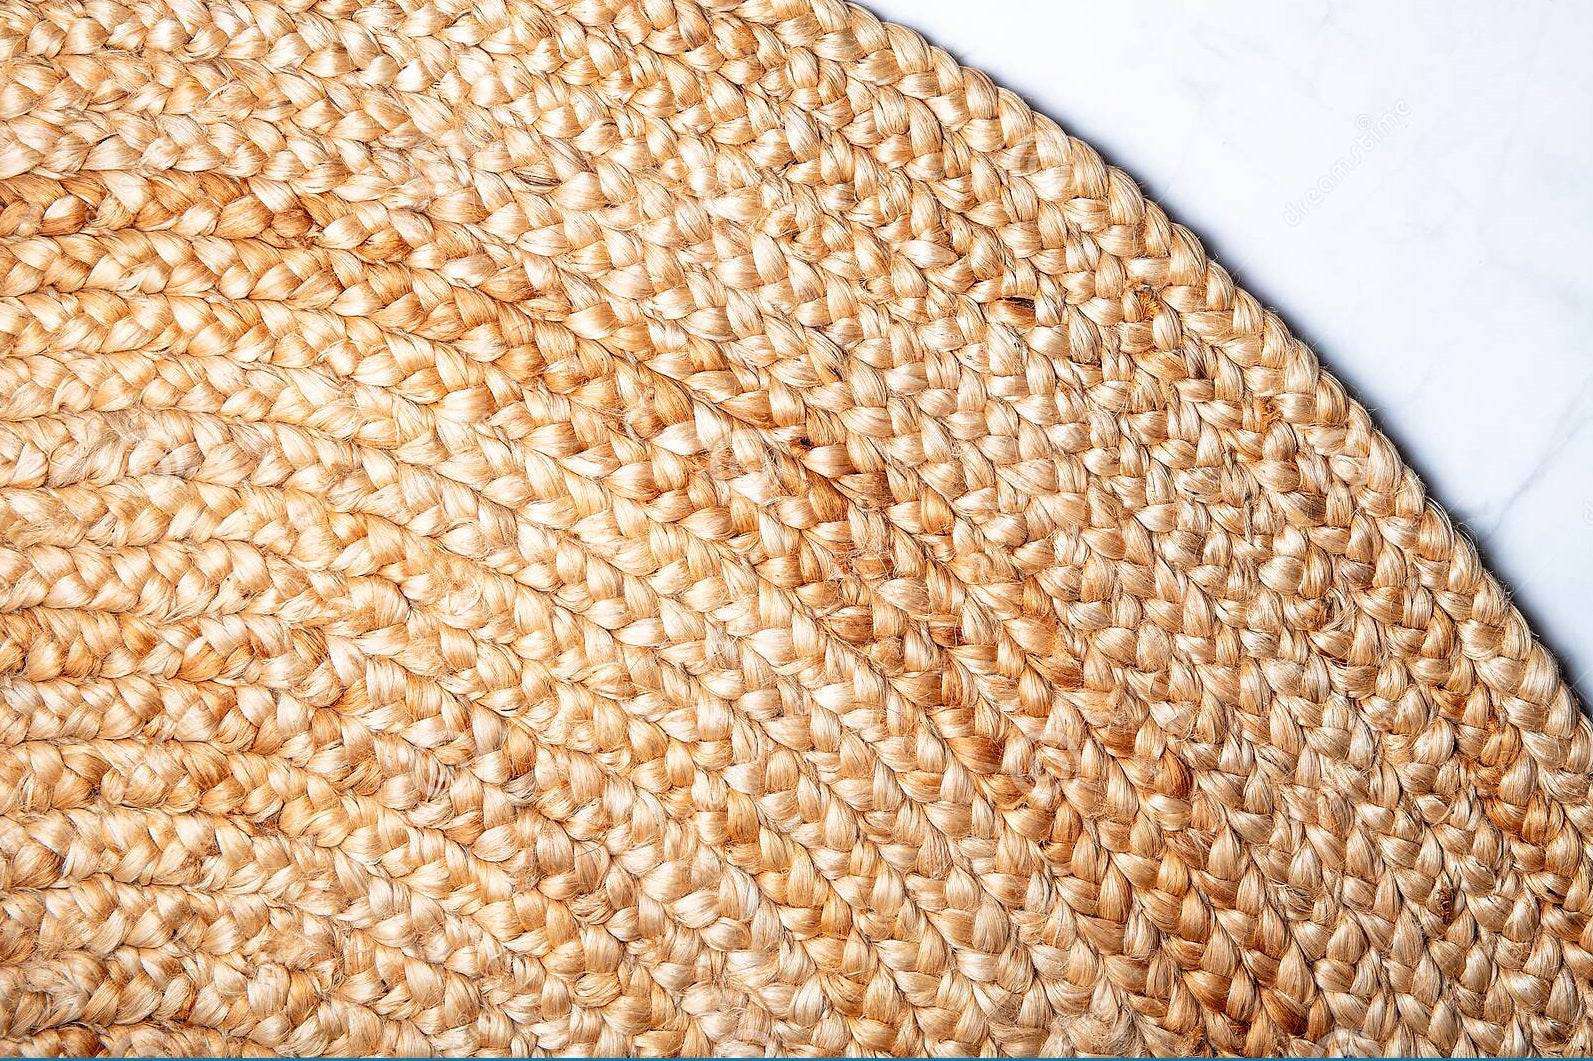 Close-up view of a handwoven jute rug